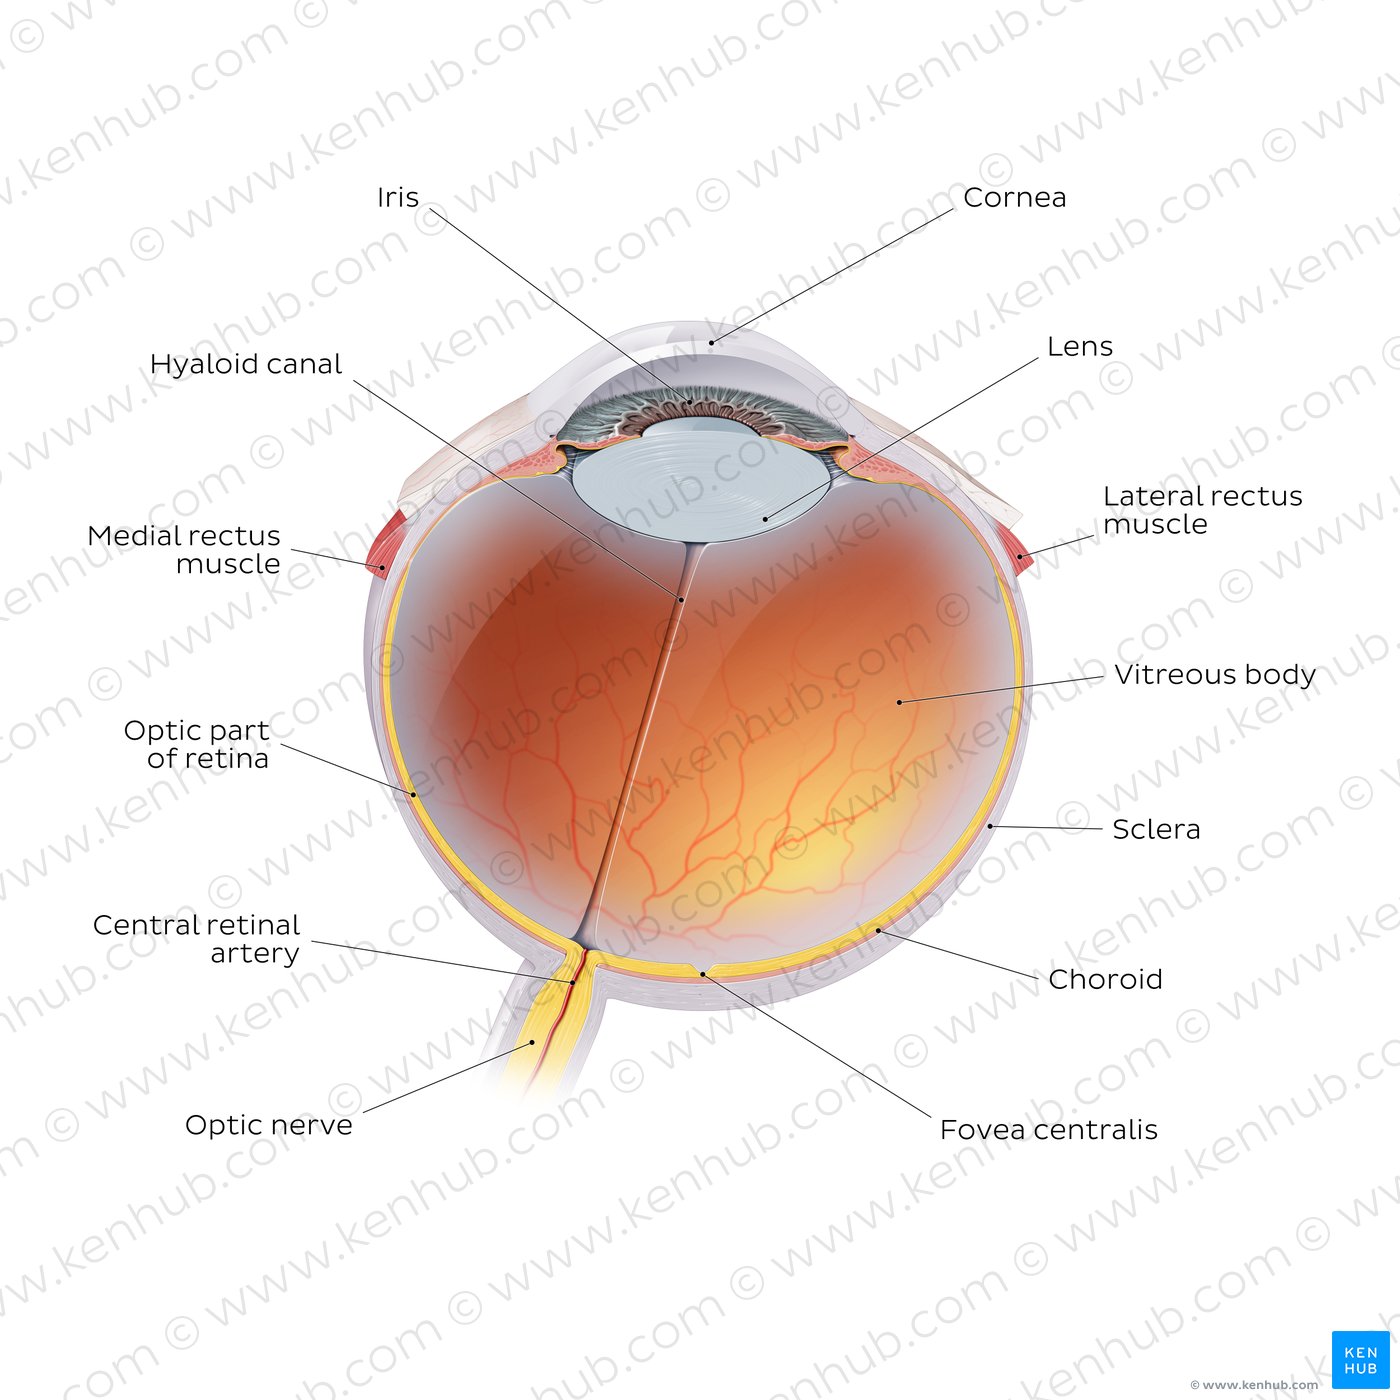 Overview of the eyeball